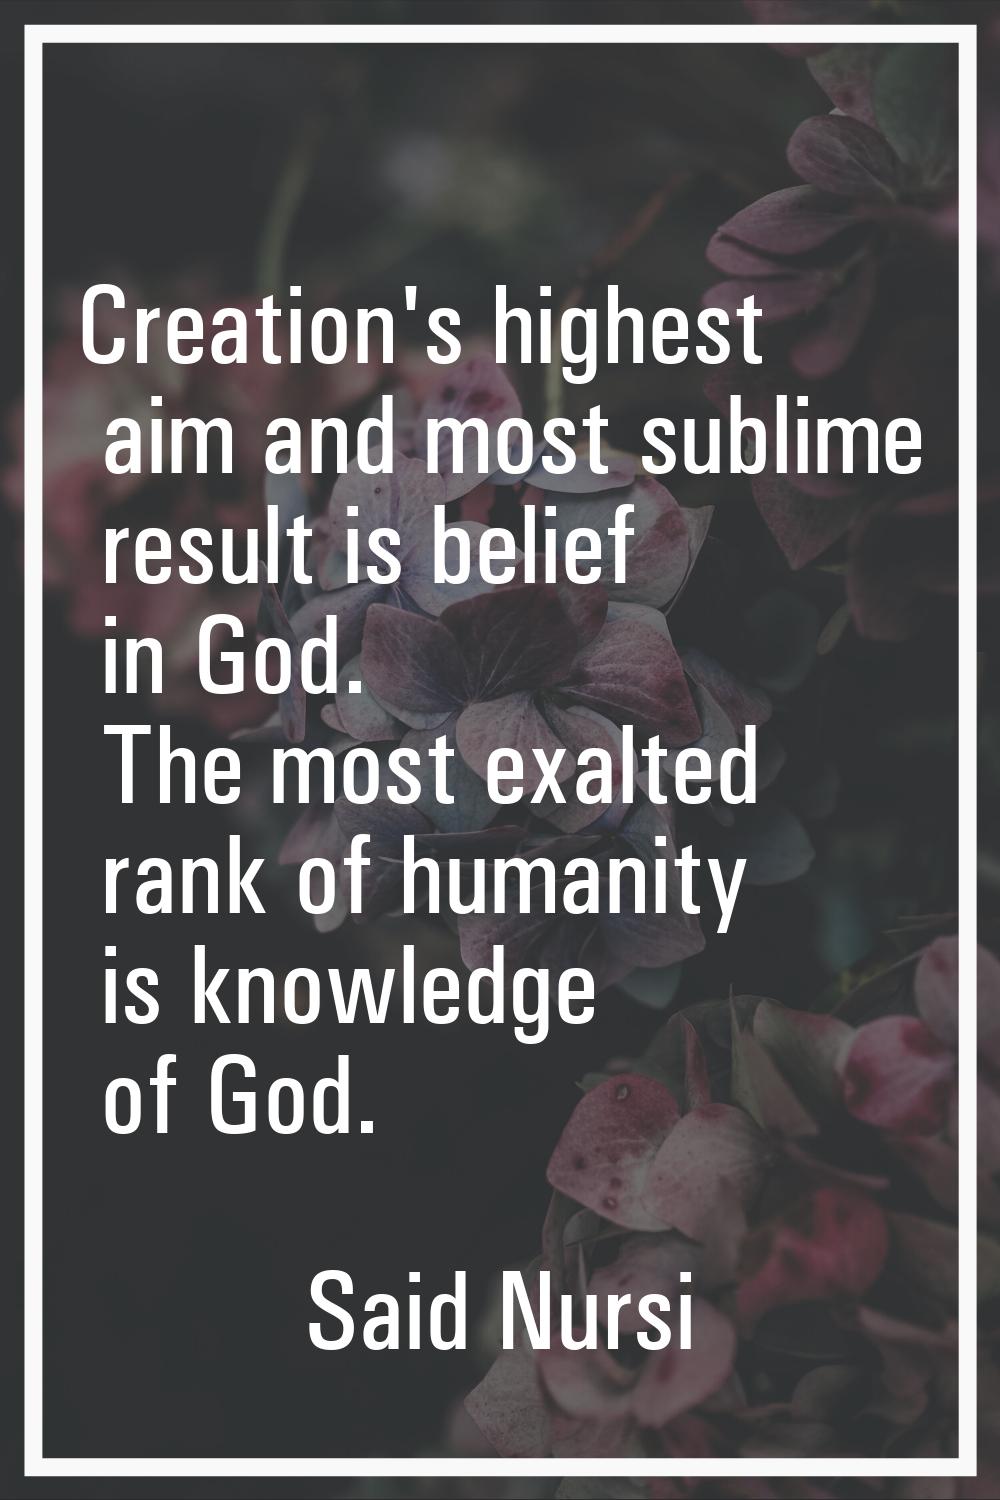 Creation's highest aim and most sublime result is belief in God. The most exalted rank of humanity 